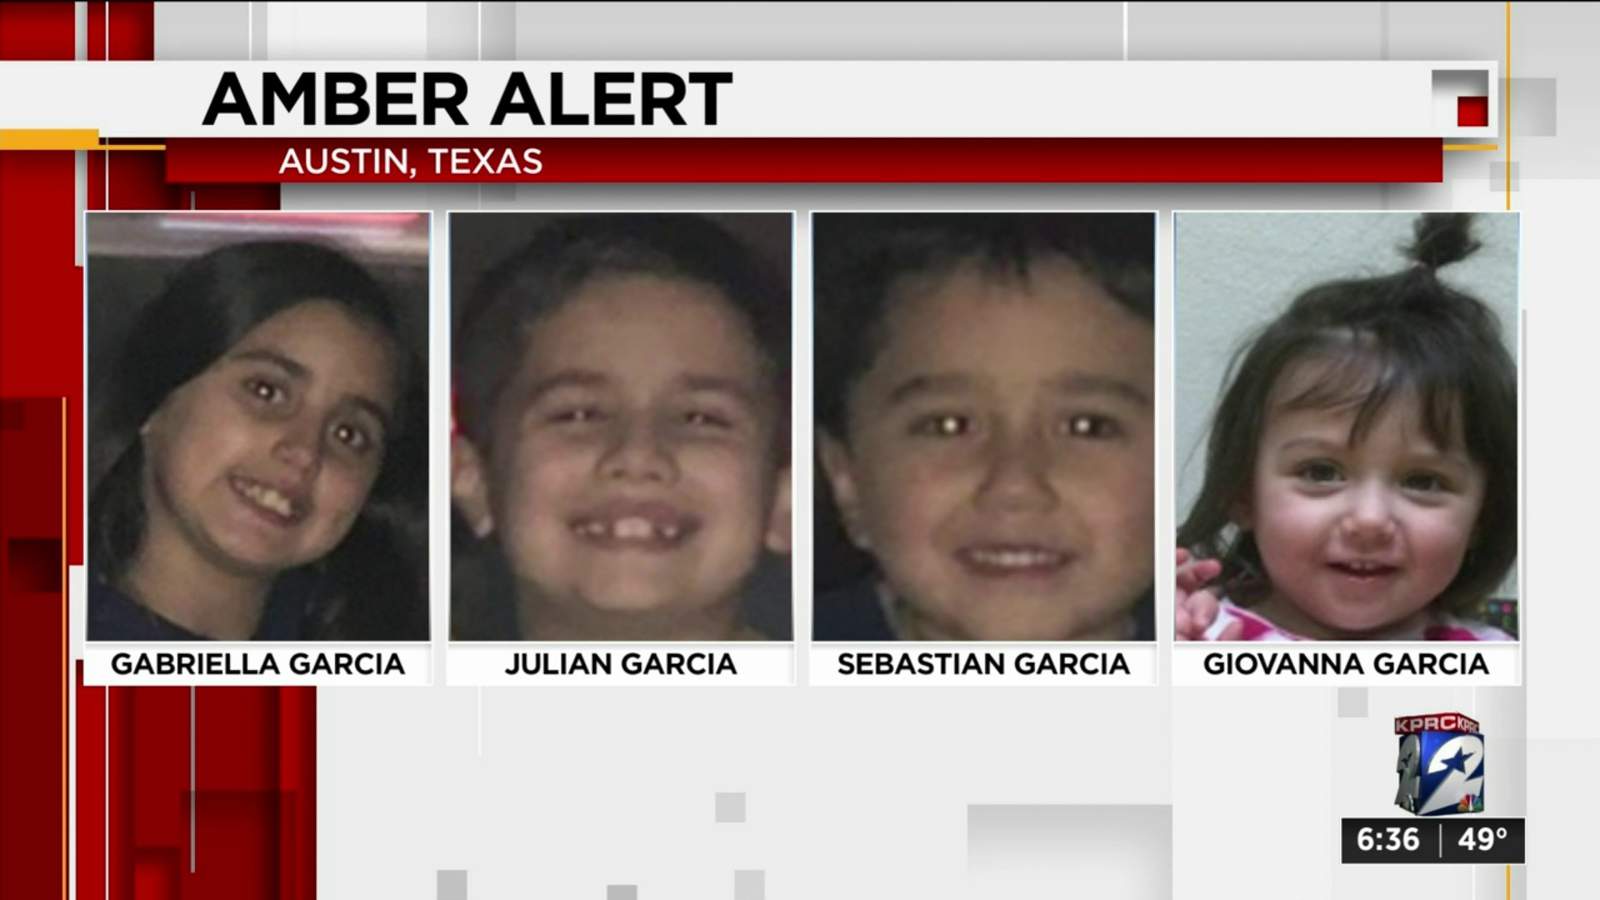 Amber Alert issued for 4 Travis County children believed to be in grave or immediate danger